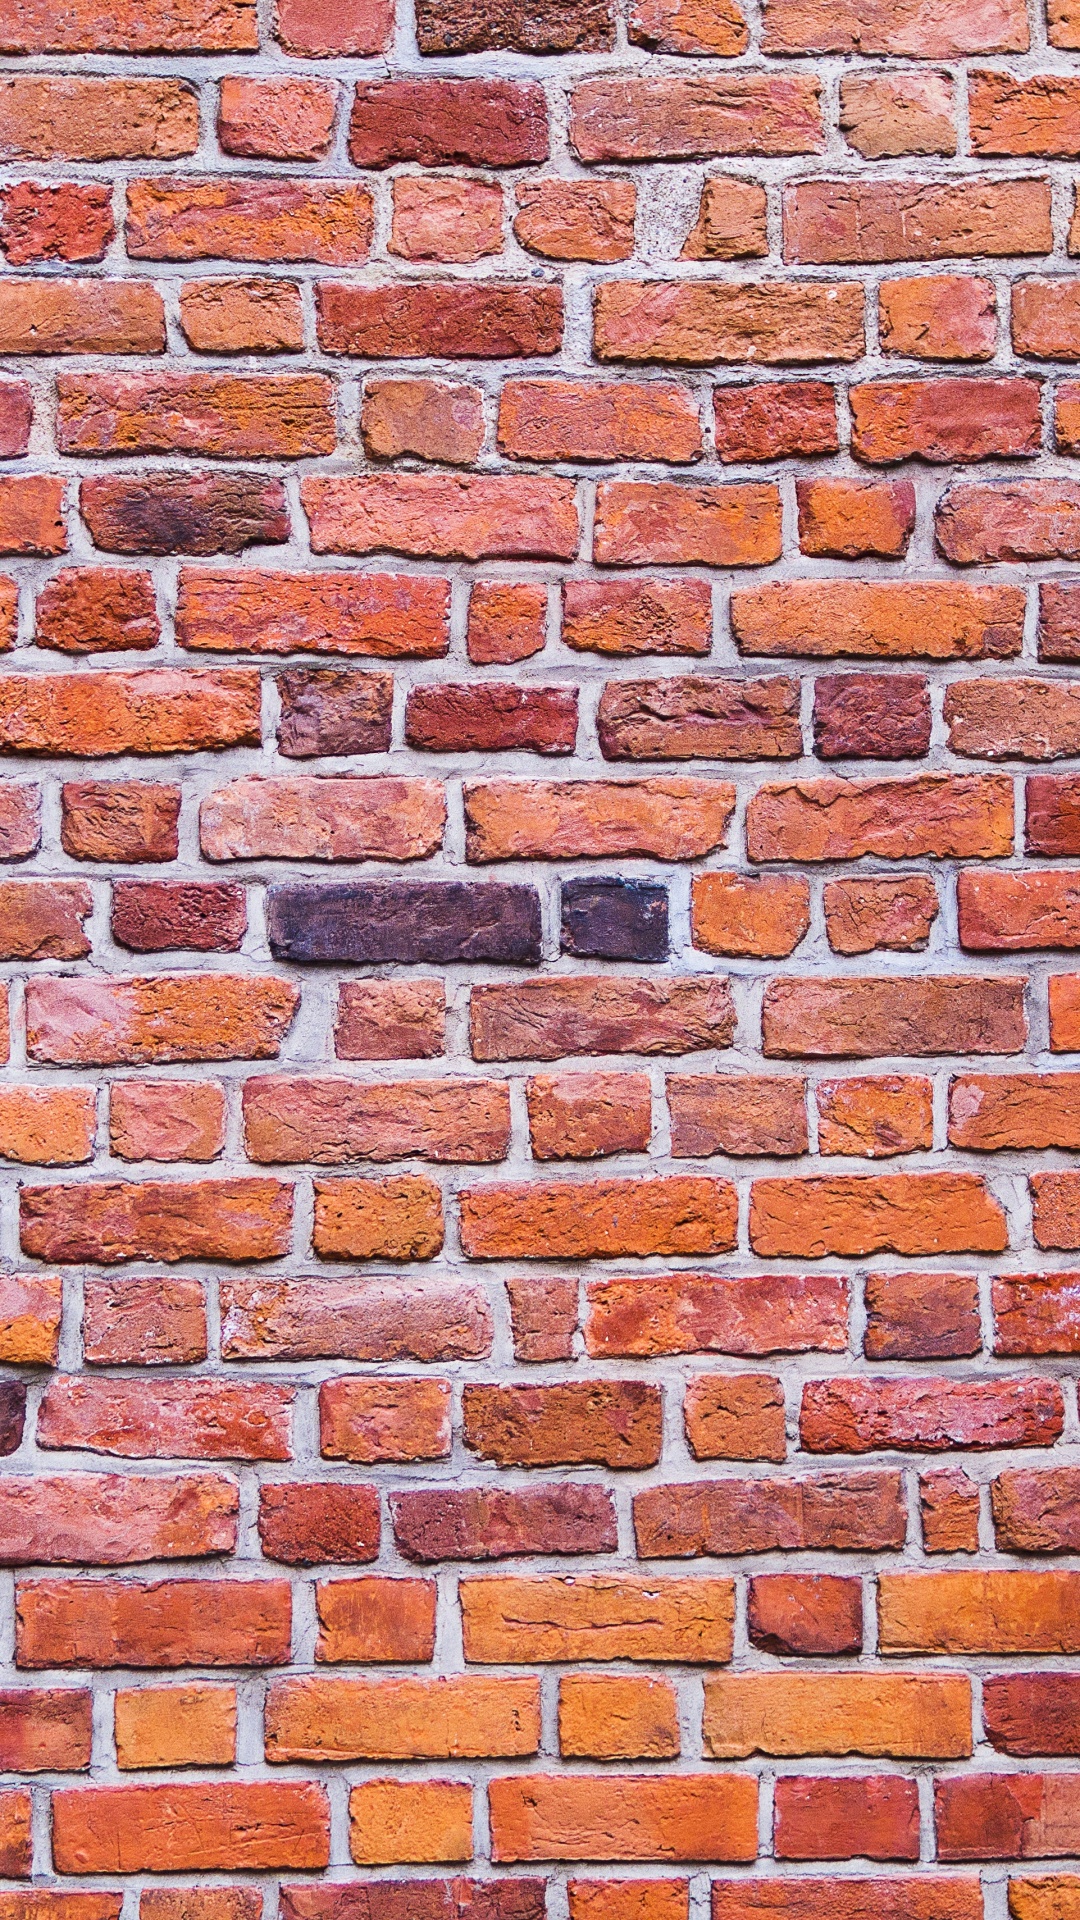 Brown and Black Brick Wall. Wallpaper in 1080x1920 Resolution